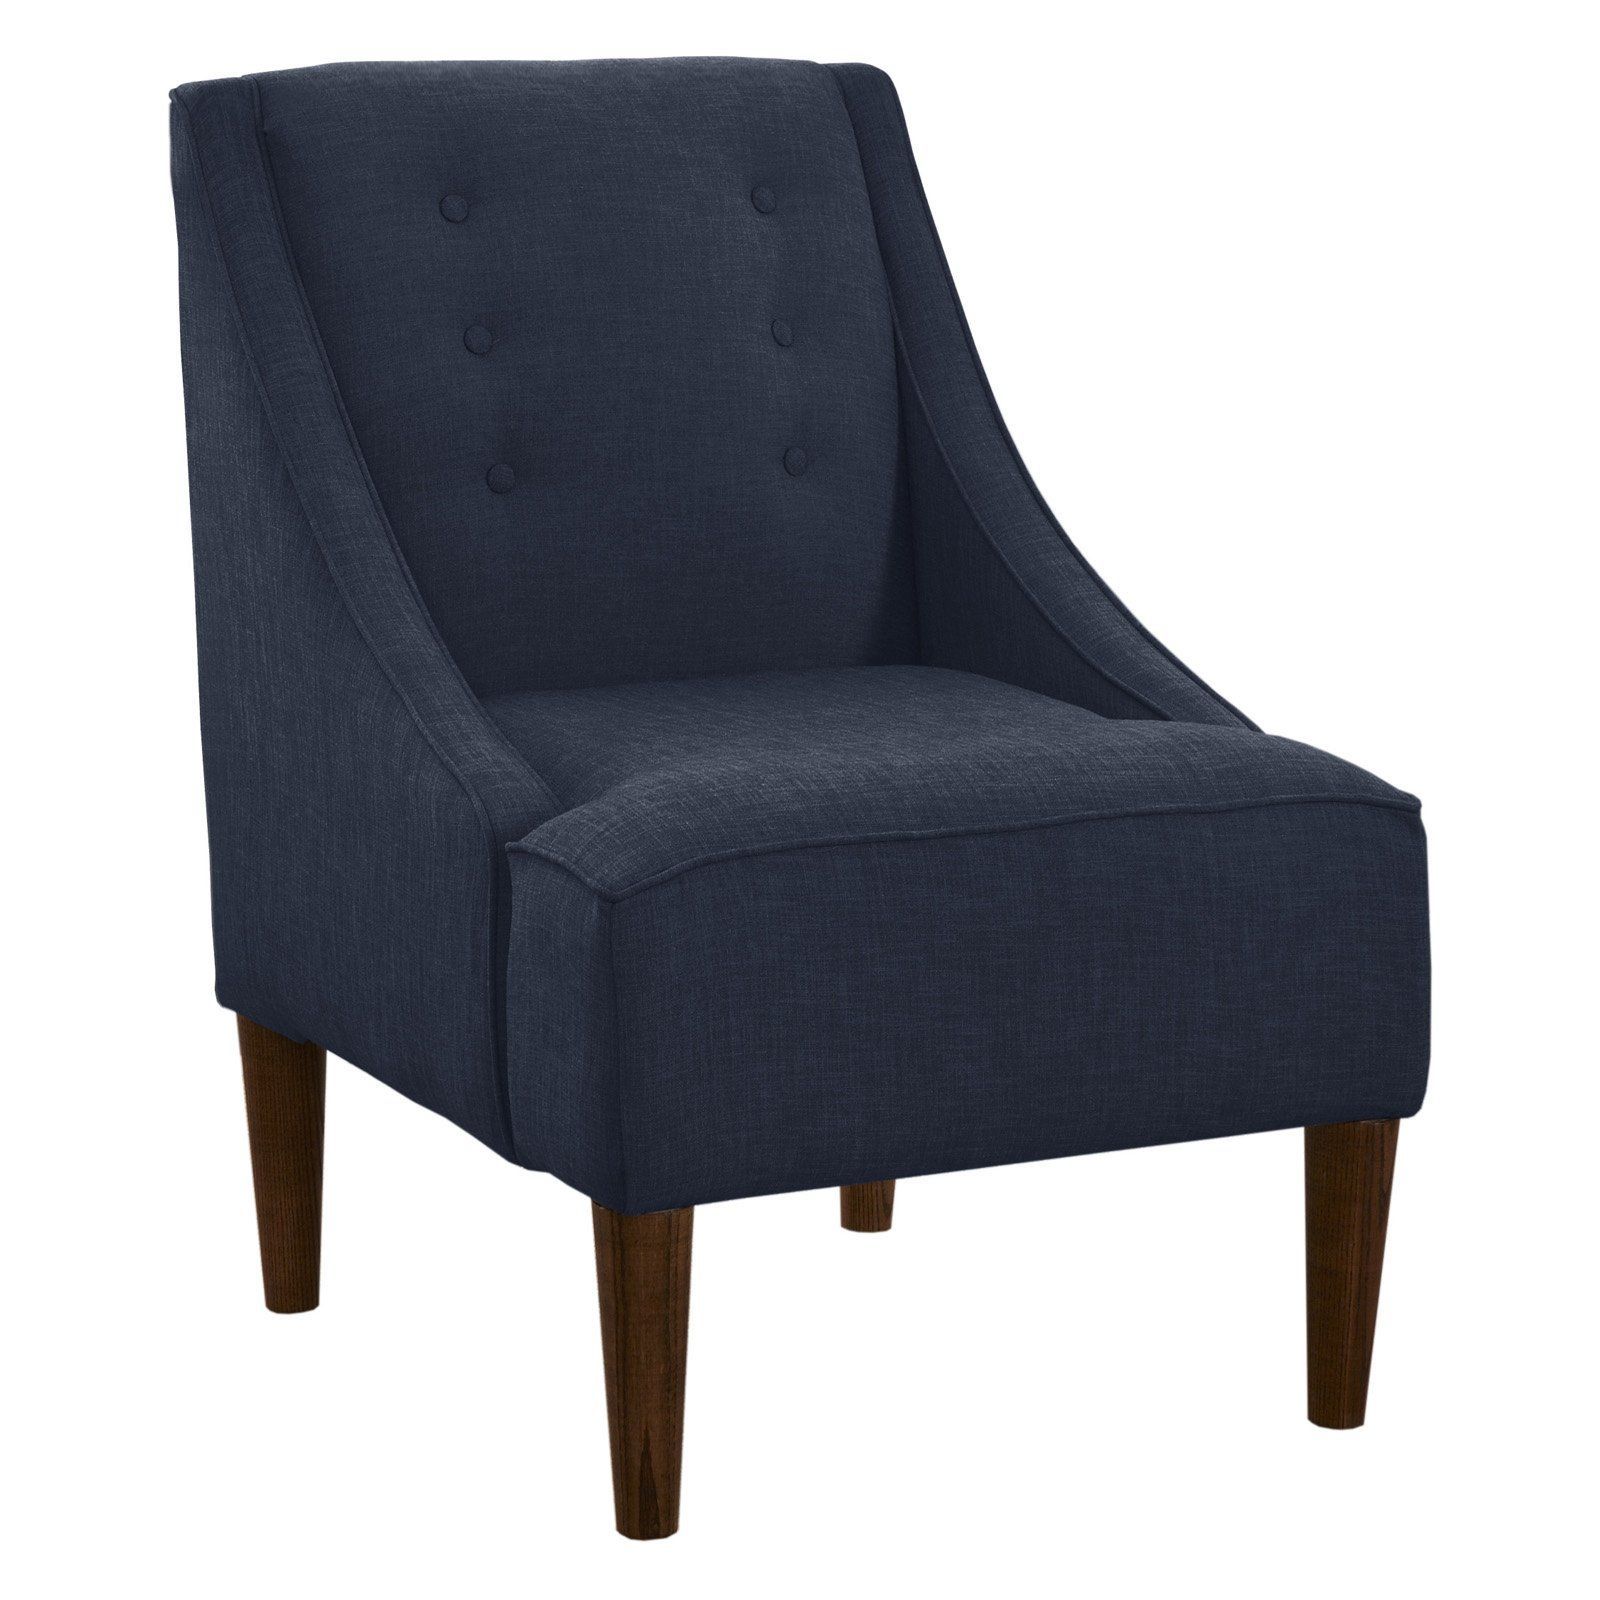 Buttons Swoop Arm Linen Chair – Navy | Linen Chair Within Borst Armchairs (View 12 of 15)